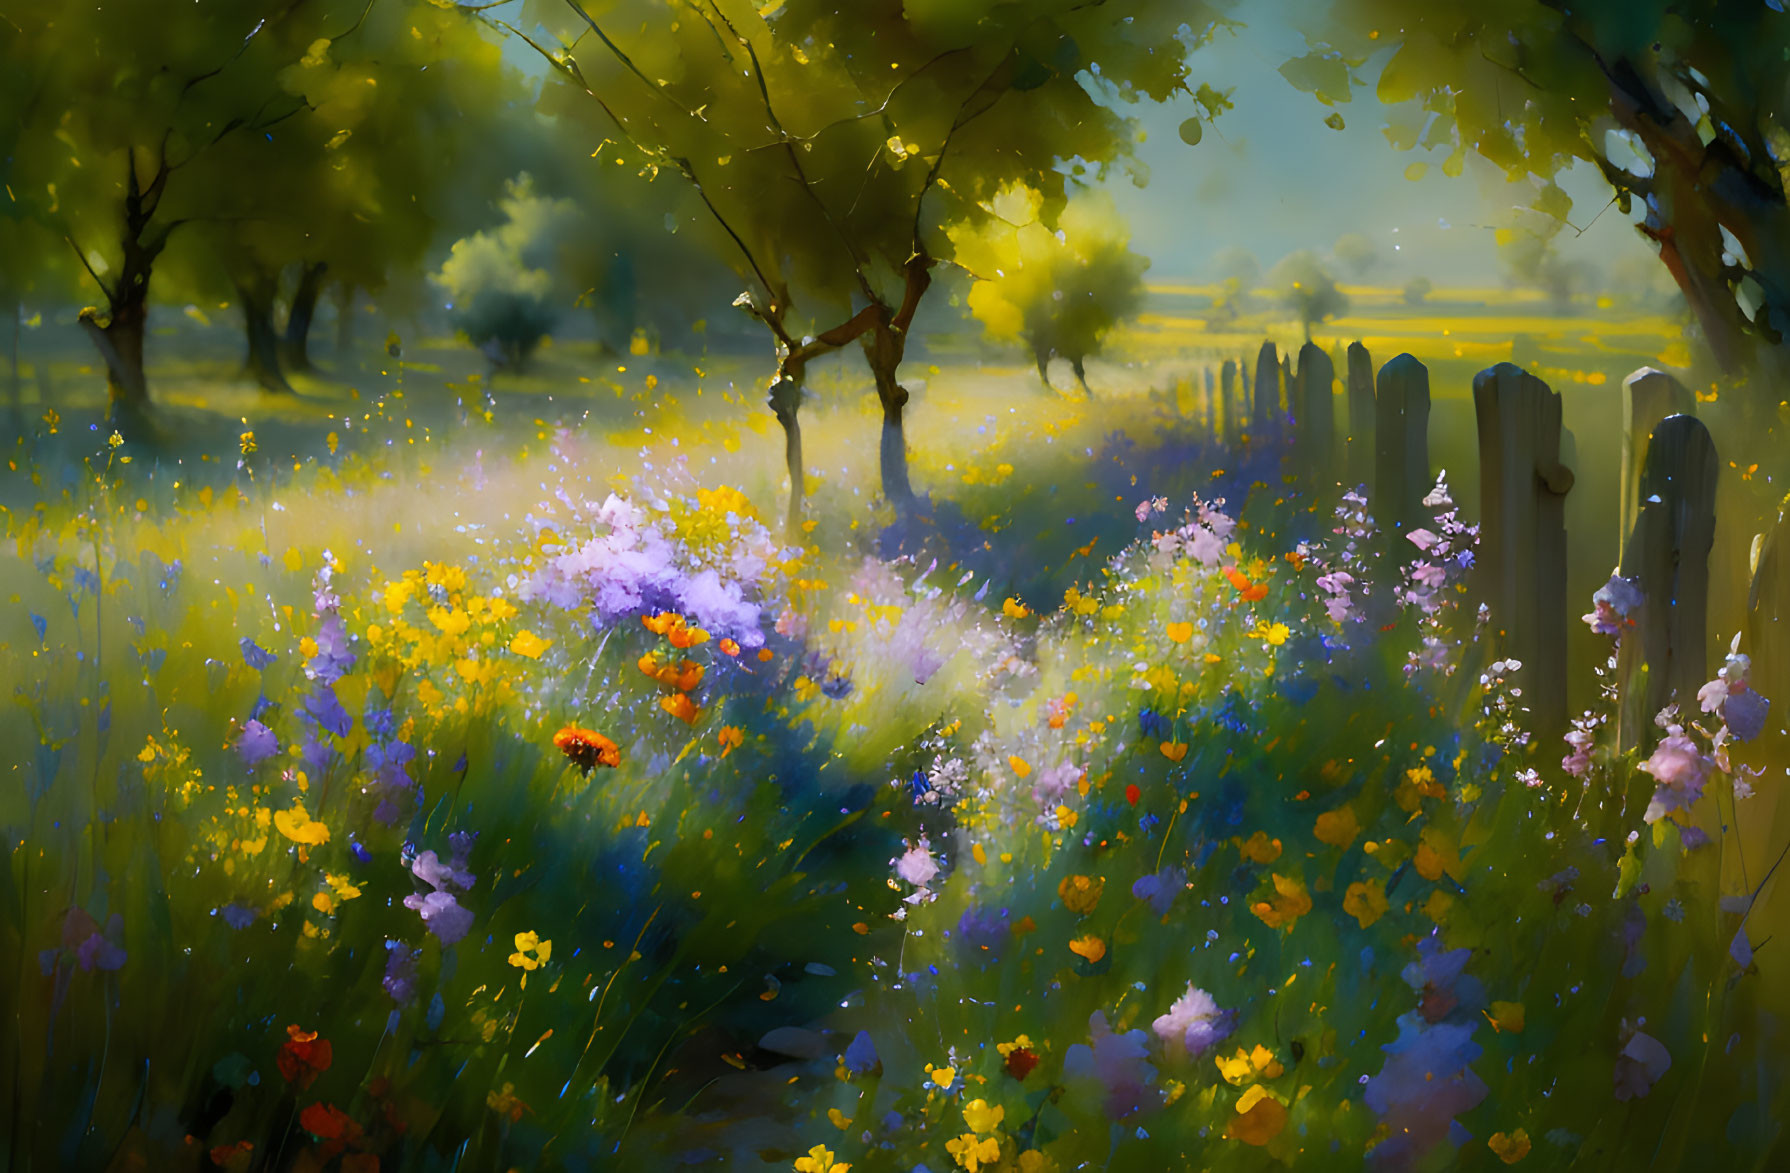 Tranquil landscape with vibrant wildflowers, sunlit trees, and rustic fence